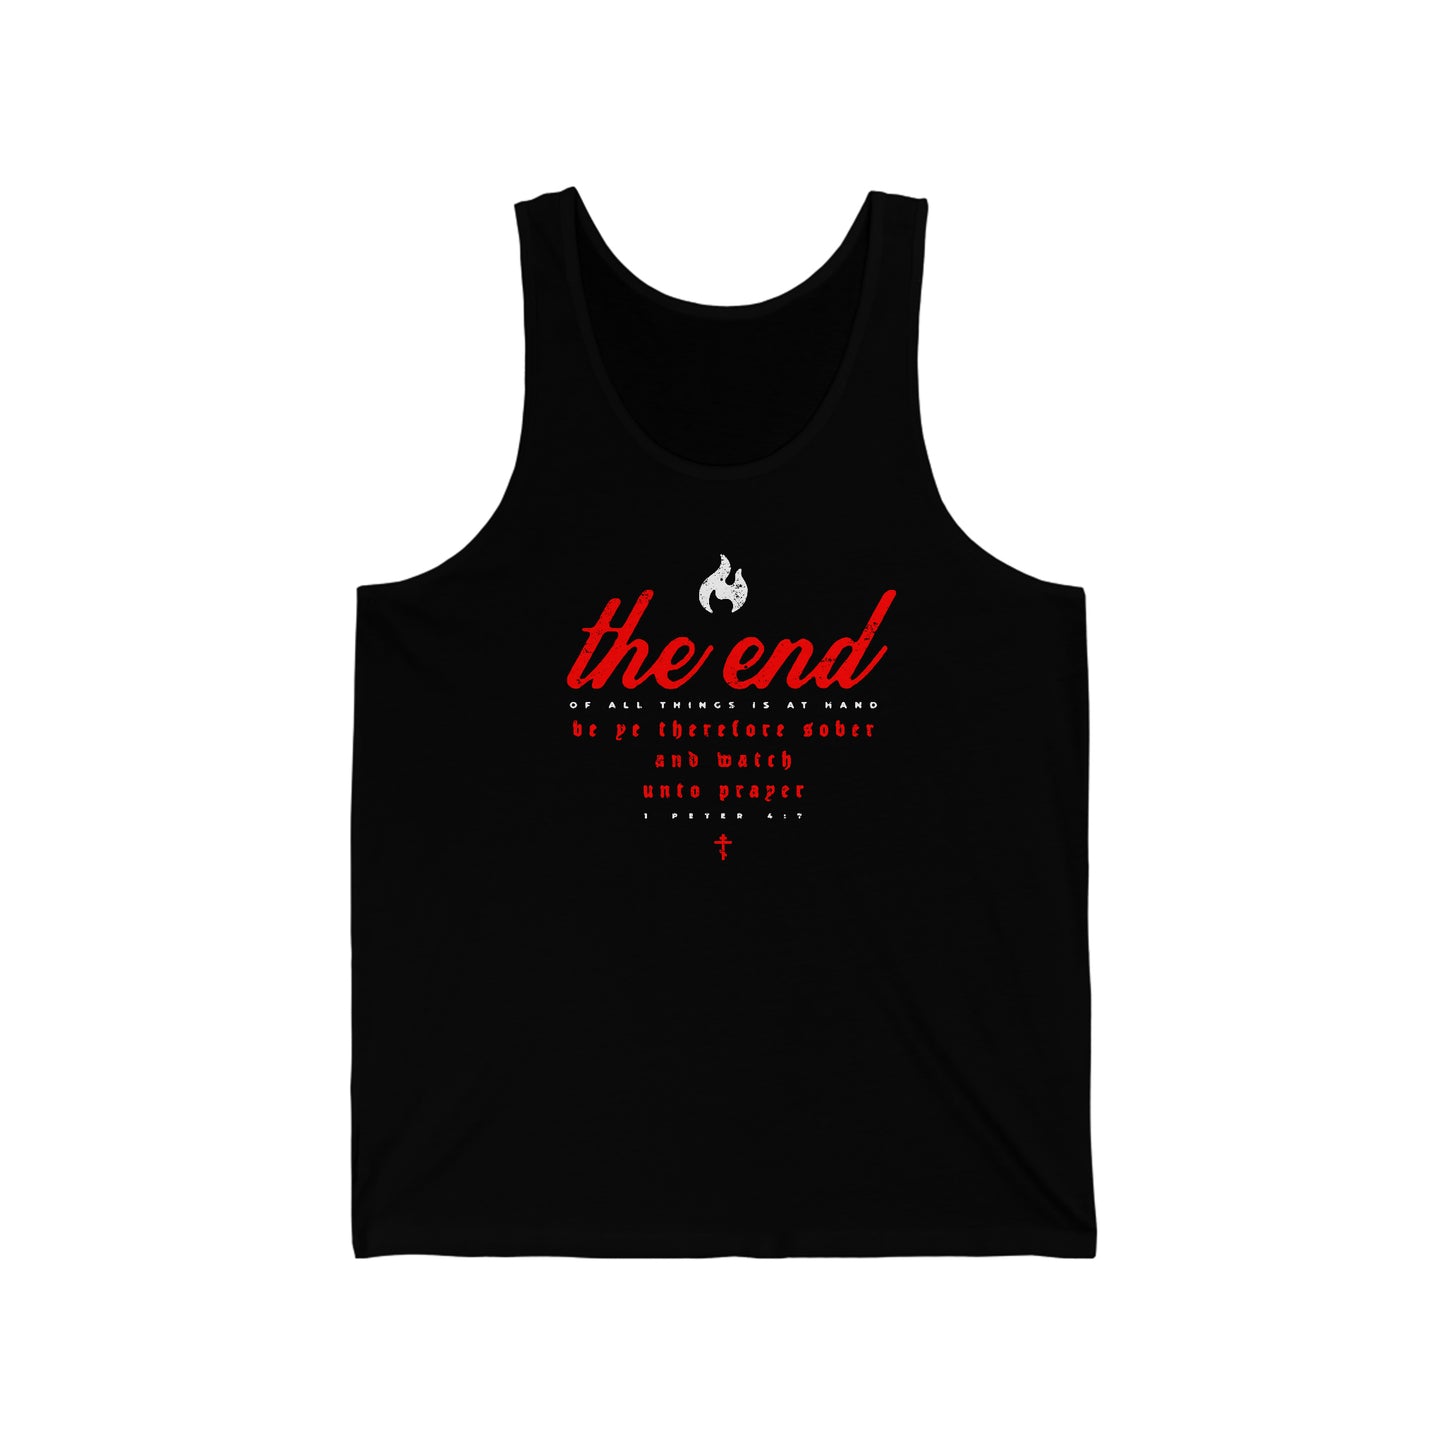 The End of All Things No. 5 | Orthodox Christian Jersey Tank Top / Sleeveless Shirt